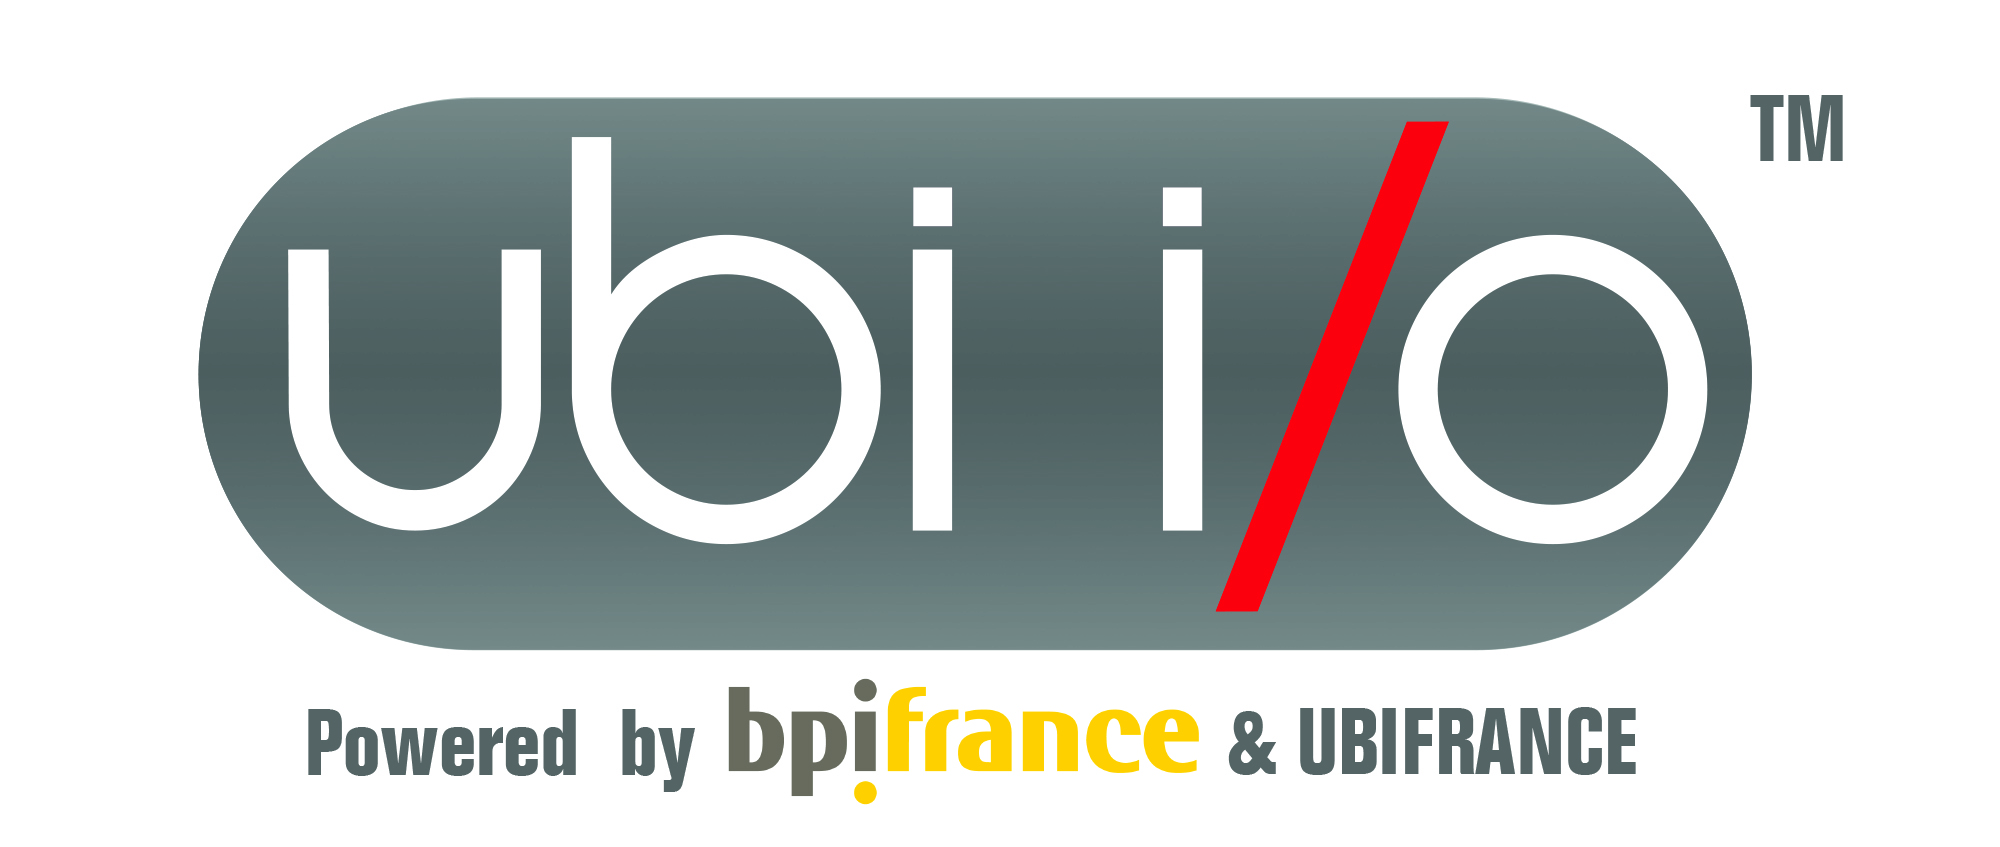  ub/io ubi i/o is the Silicon Valley accelerator program launched by UBIFRANCE and Bpifrance and dedicated to highly promising French tech companies having a well-defined and achievable U.S. project. ubi i/o is an evolution of UBIFRANCE’s annual French Tech Tour, 7 years in existence. The 8 participants will use ubi i/o’s 10 week acceleration program to kickstart their business in the US, and introduce their outstanding technologies to the American market. ubi i/o is a part of the “French Tech” initiative launched this year by the French government. http://ubi-io.com/